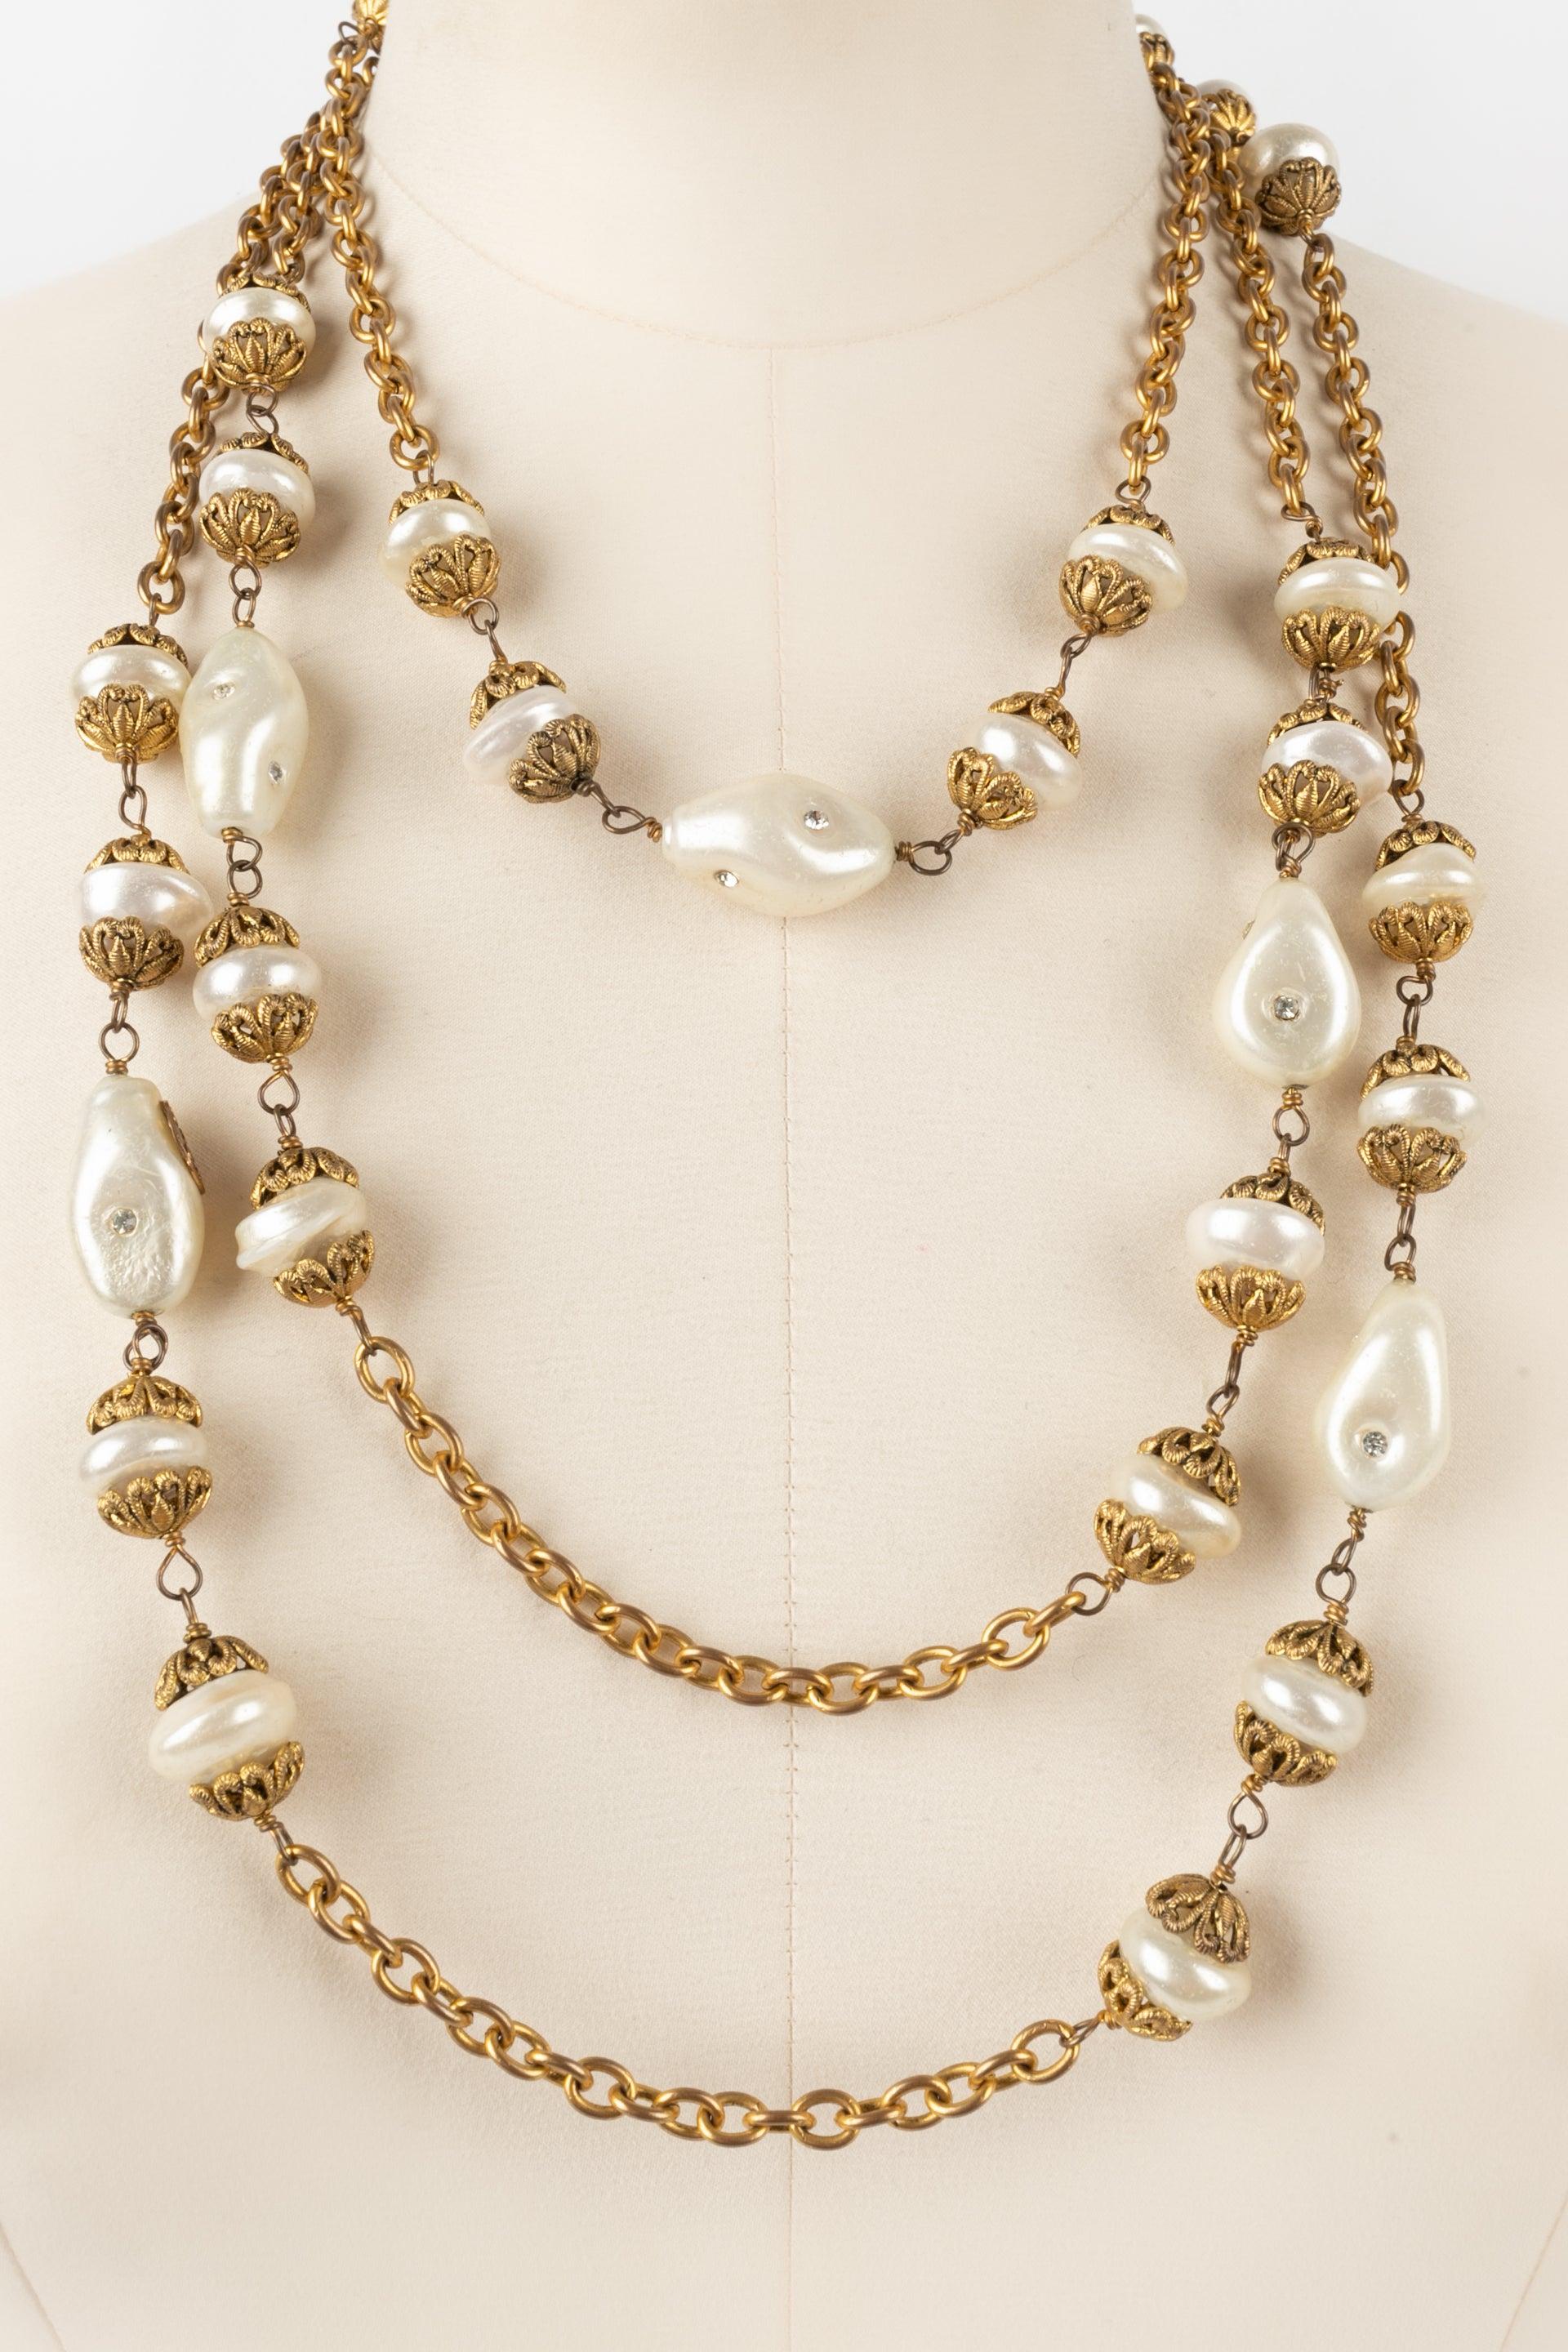 Women's Chanel Golden Metal Sautoir with Costume Pearls and Swarovski Rhinestones, 1984 For Sale